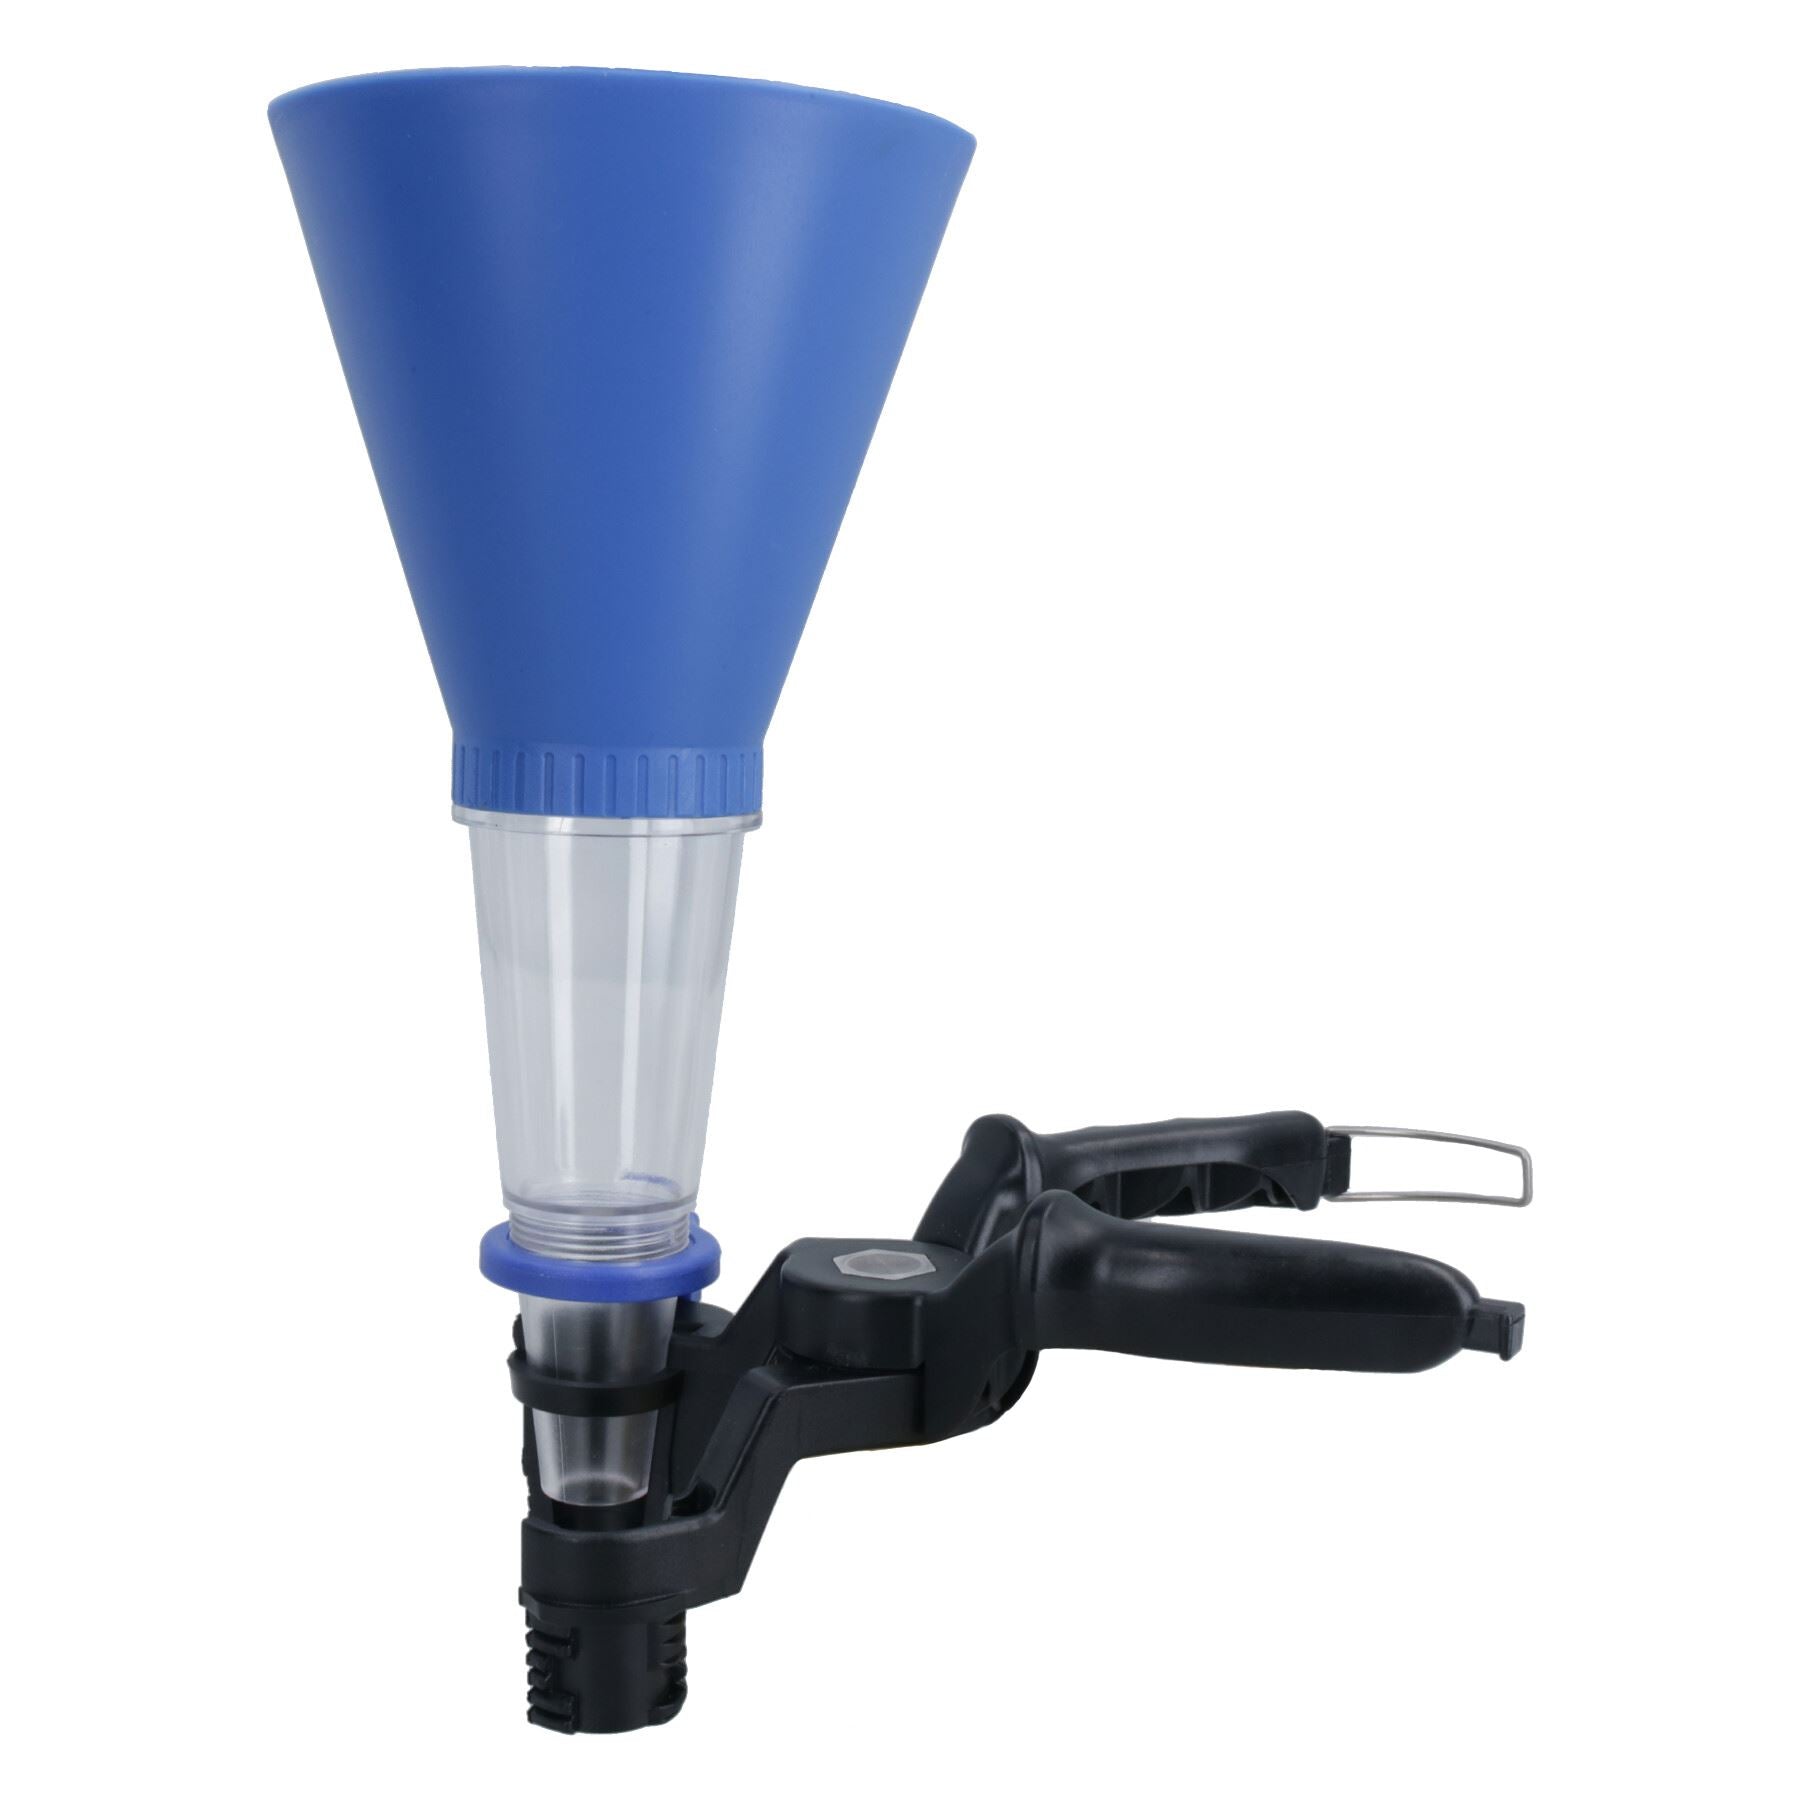 Hands Free Funnel Set With Secure Clamp and Transparent Lower Chamber